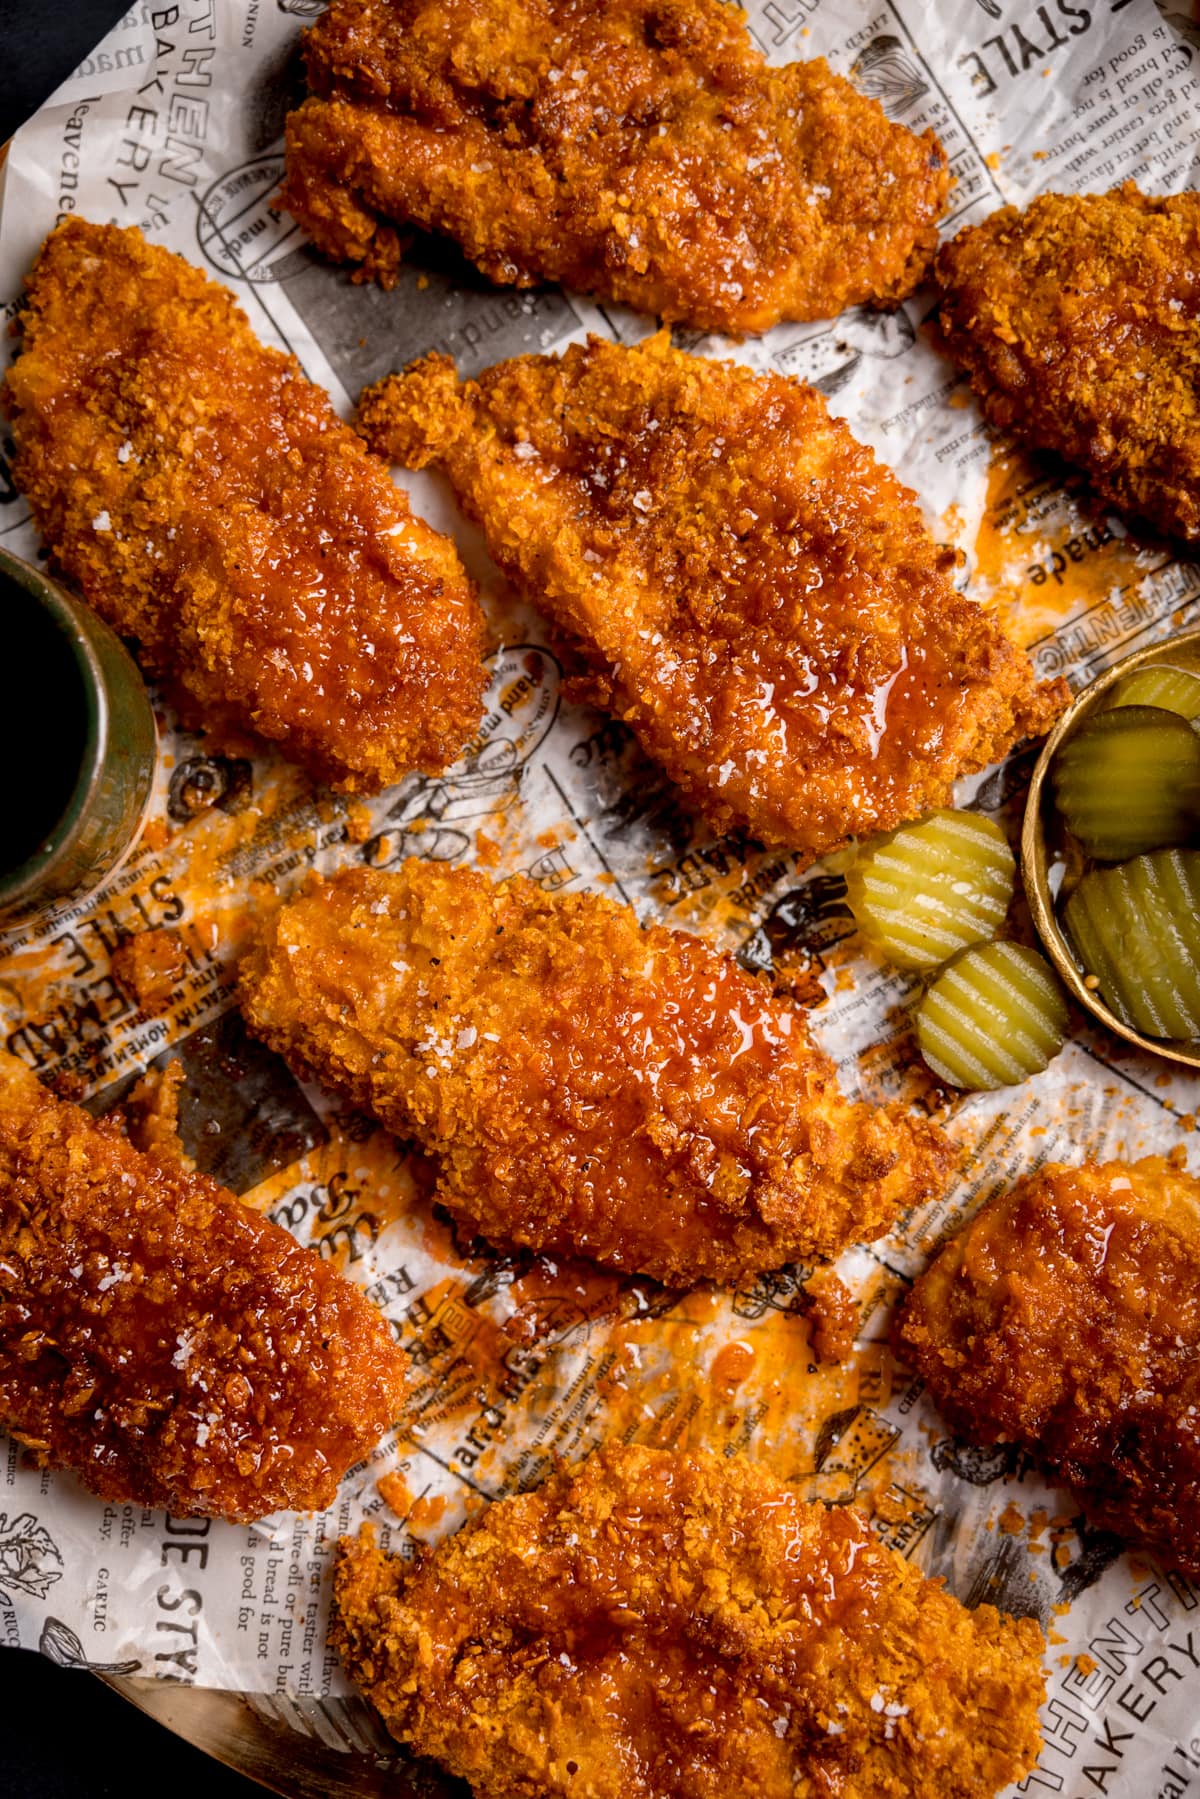 Overhead image of crispy baked chicken breast fillets on a baking tray with sliced pickles. The chicken has been drizzled with hot honey sauce.